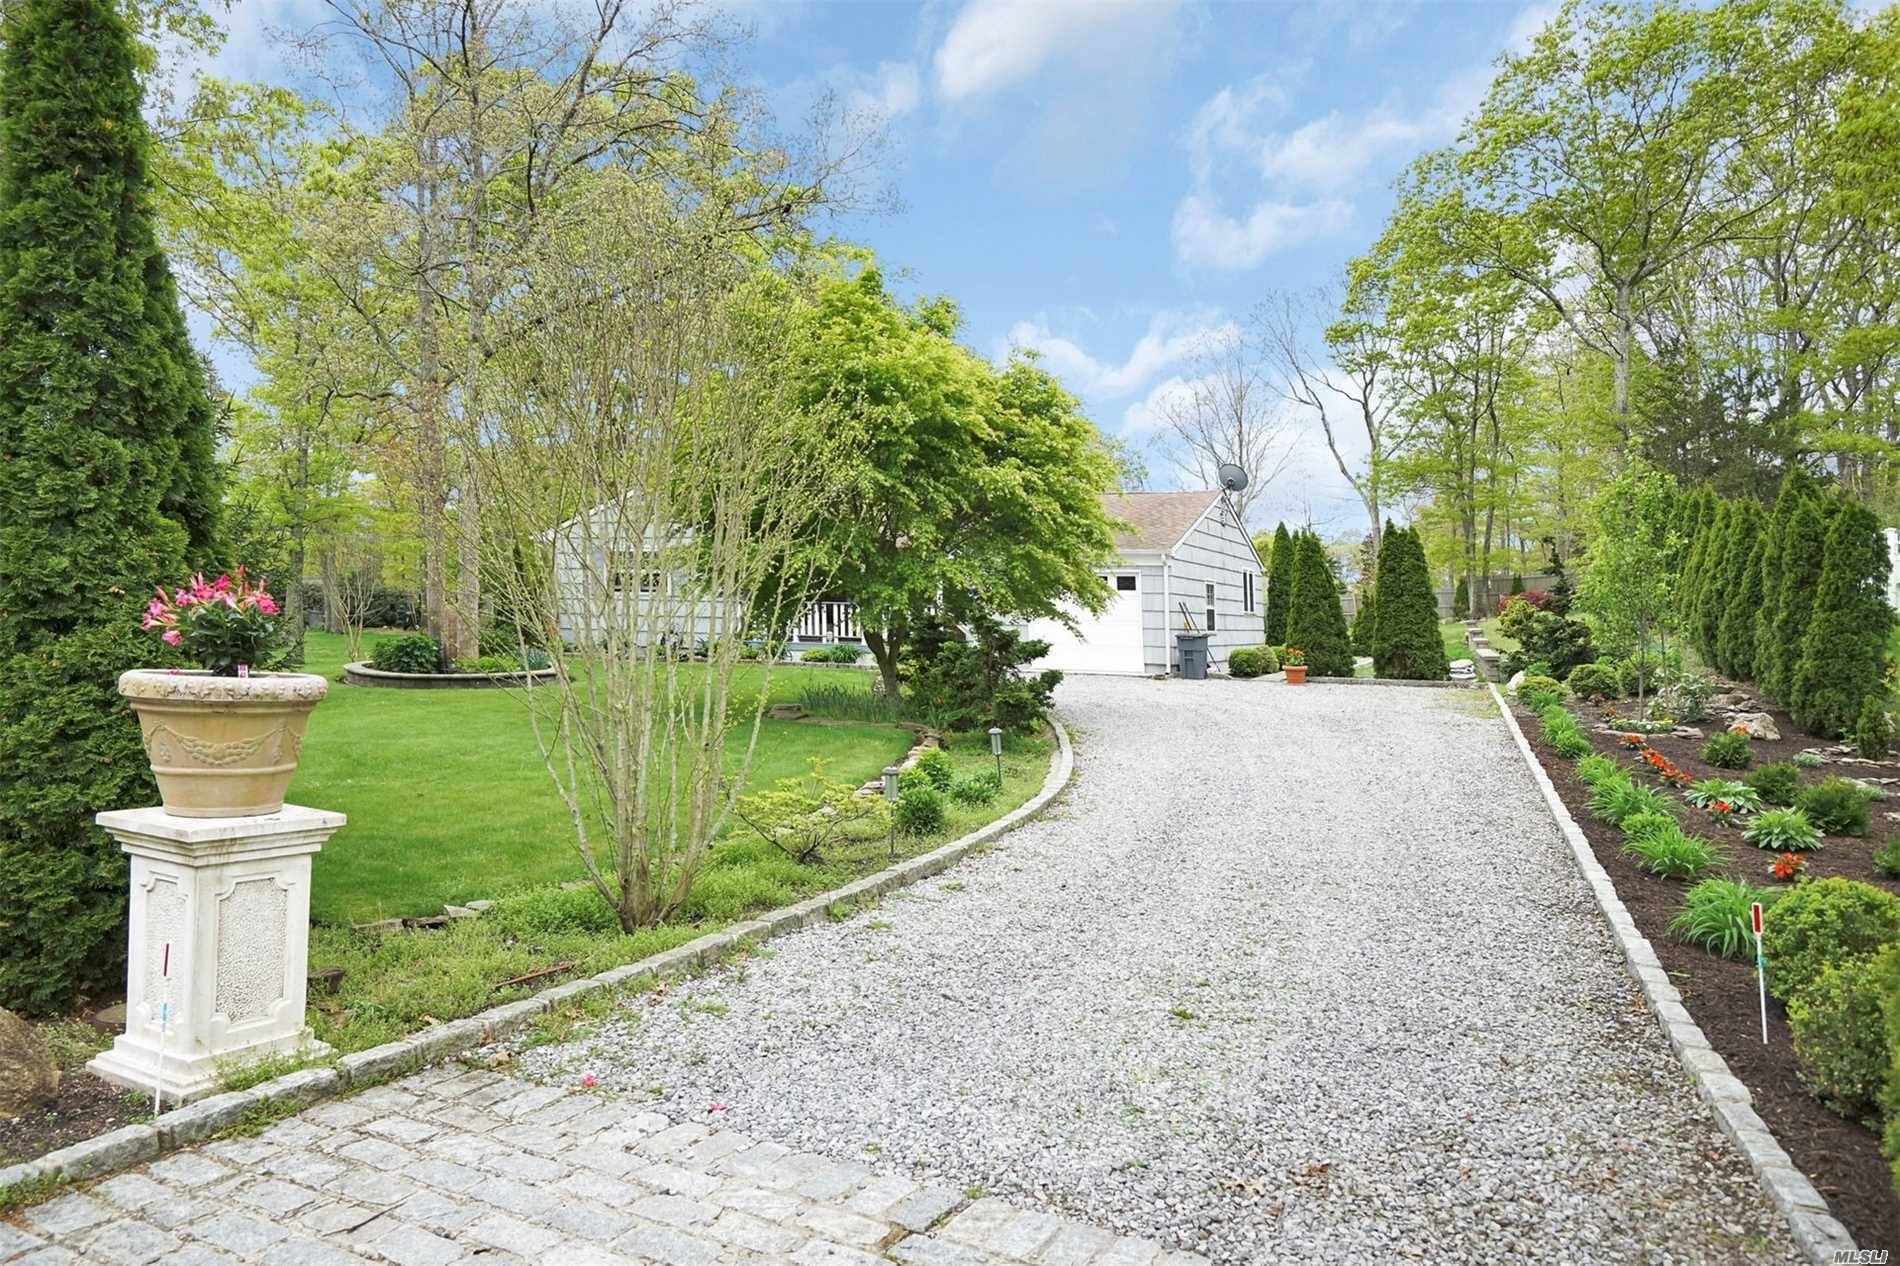 Lovely Home On Quiet Cul De Sac With Amazing Landscaping And Very Private Setting.